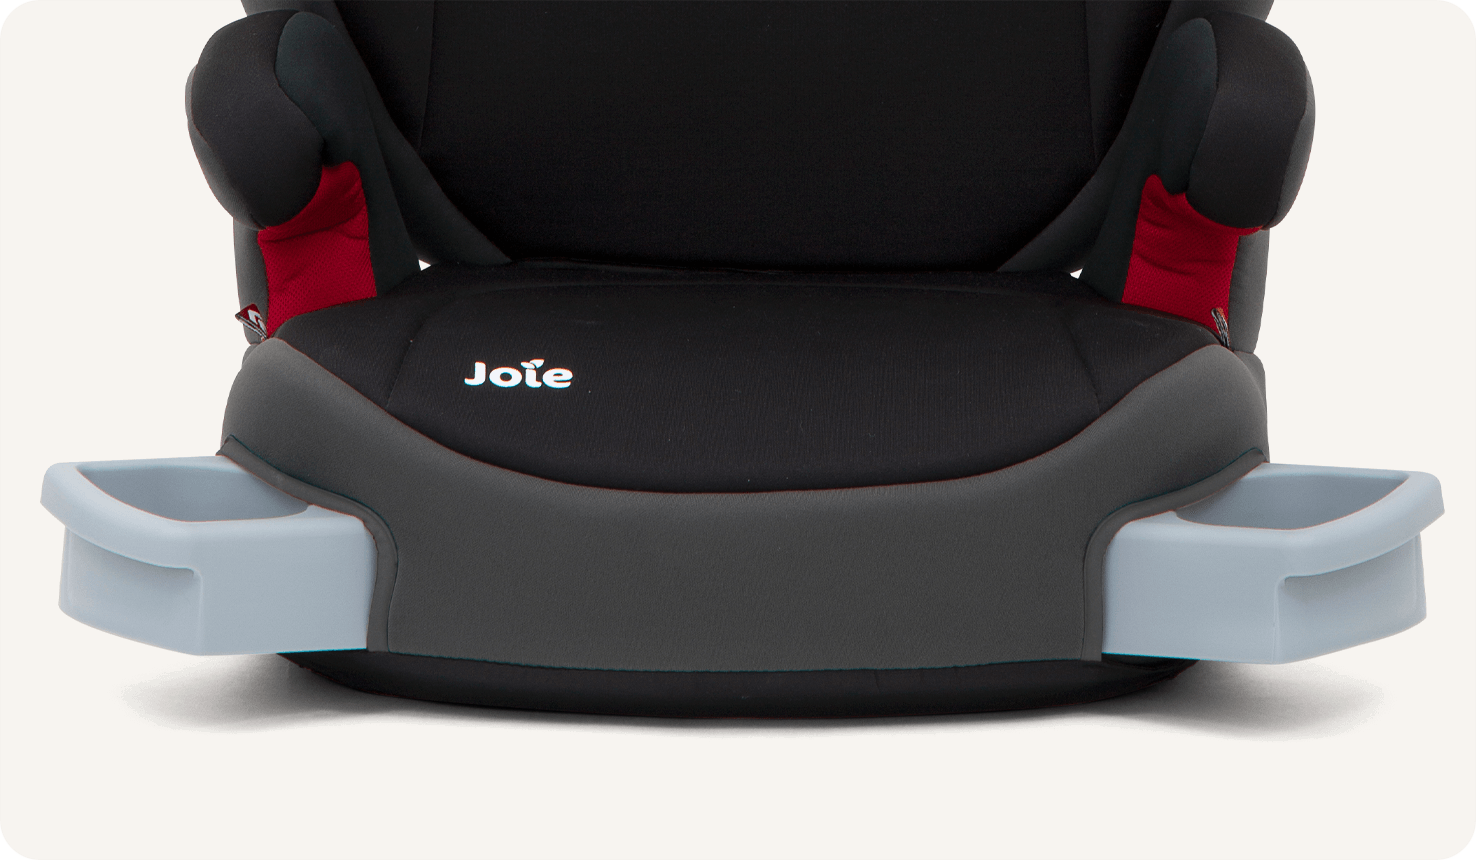 Zoomed in view of the cupholders on the Joie trillo booster seat.